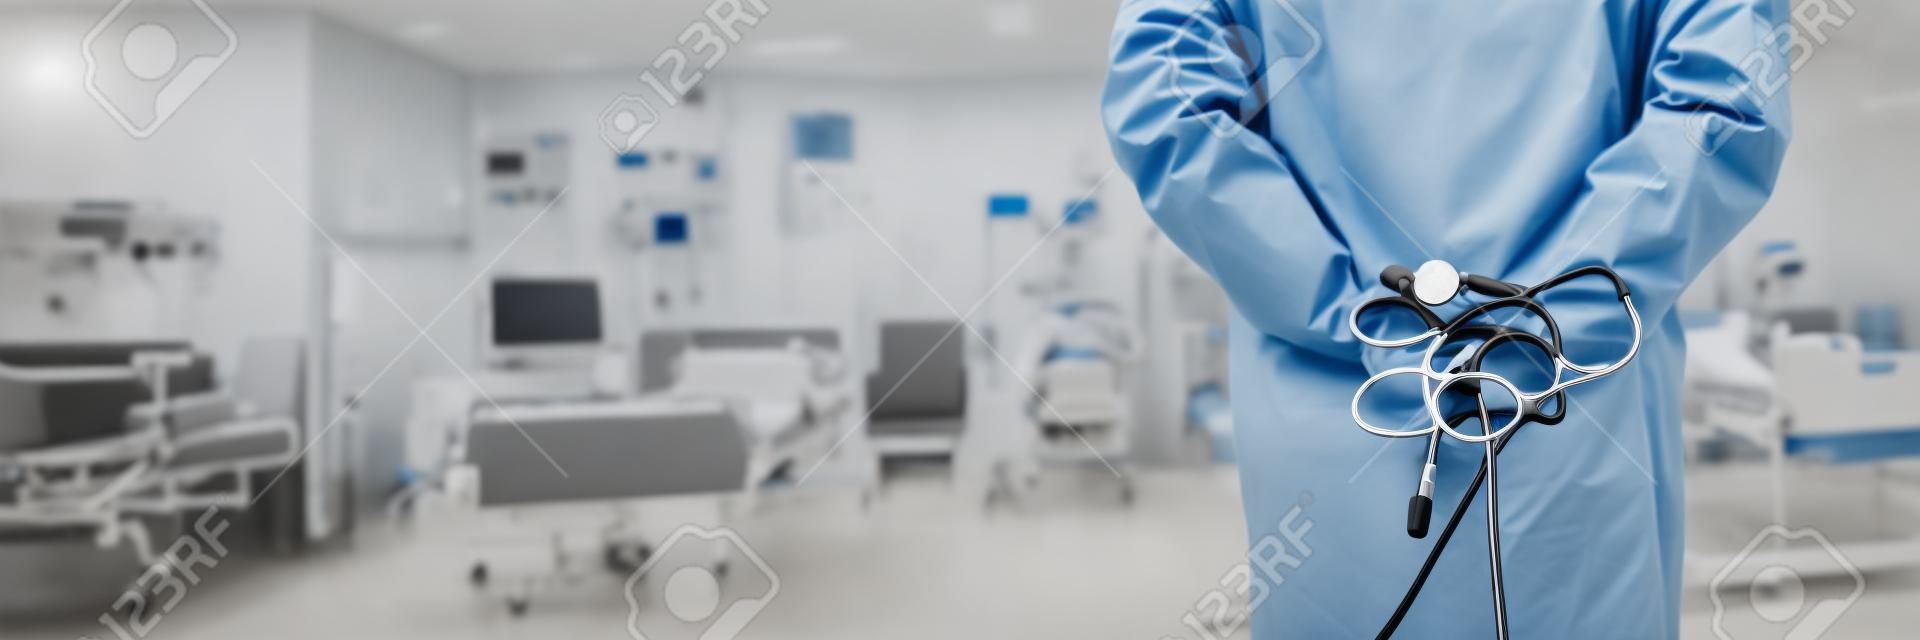 rear view of a male doctor with stethoscope in hospital ward.